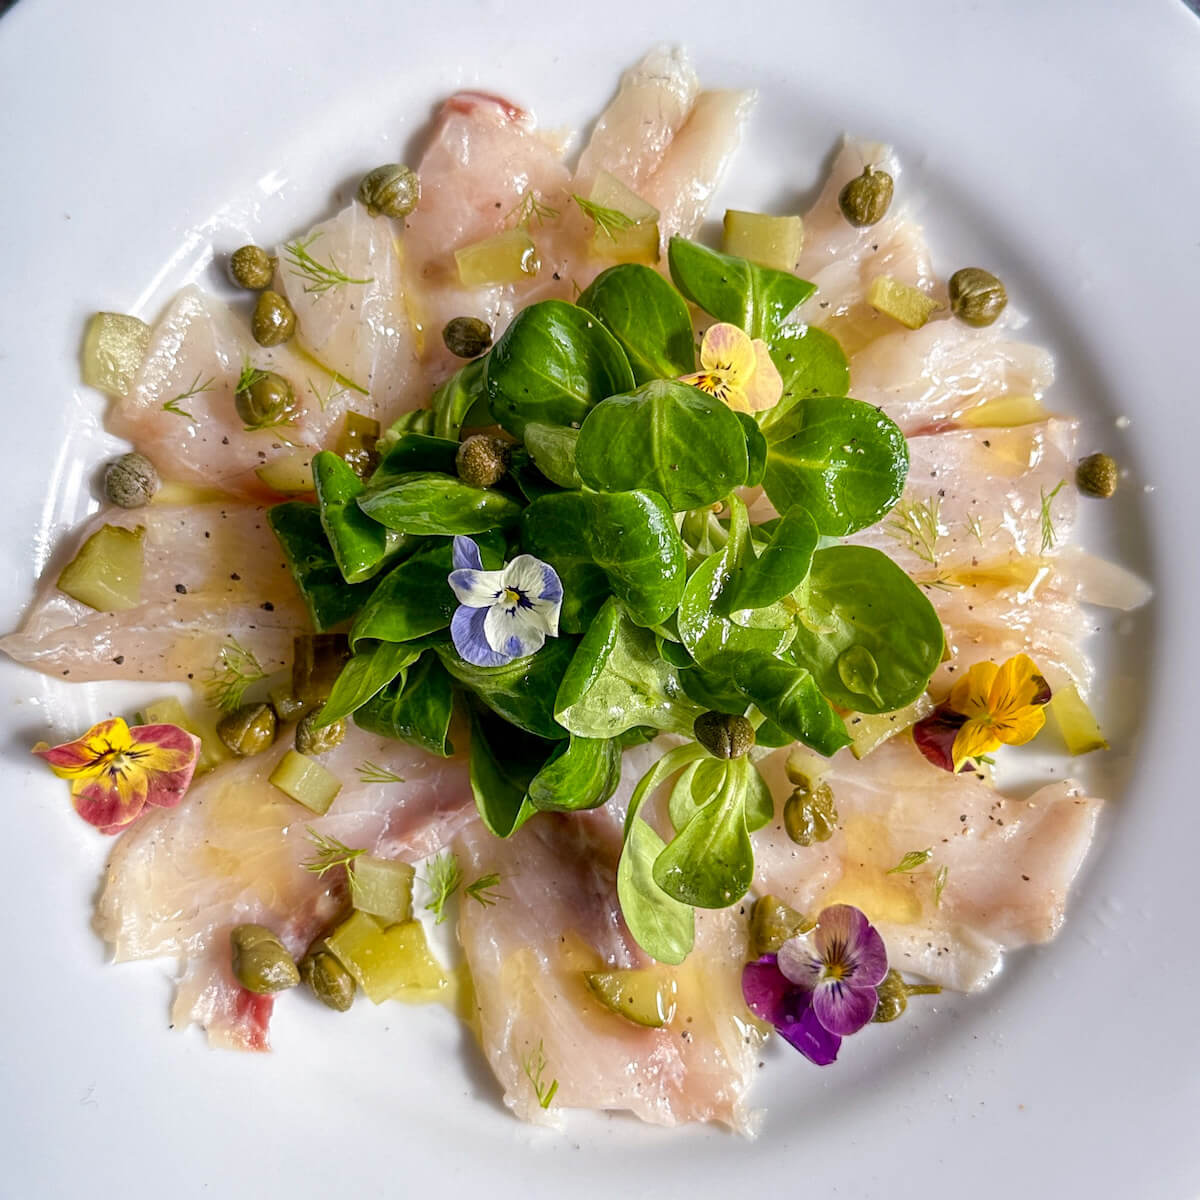 White fish carpaccio on a plate with green salad and edible flowers.